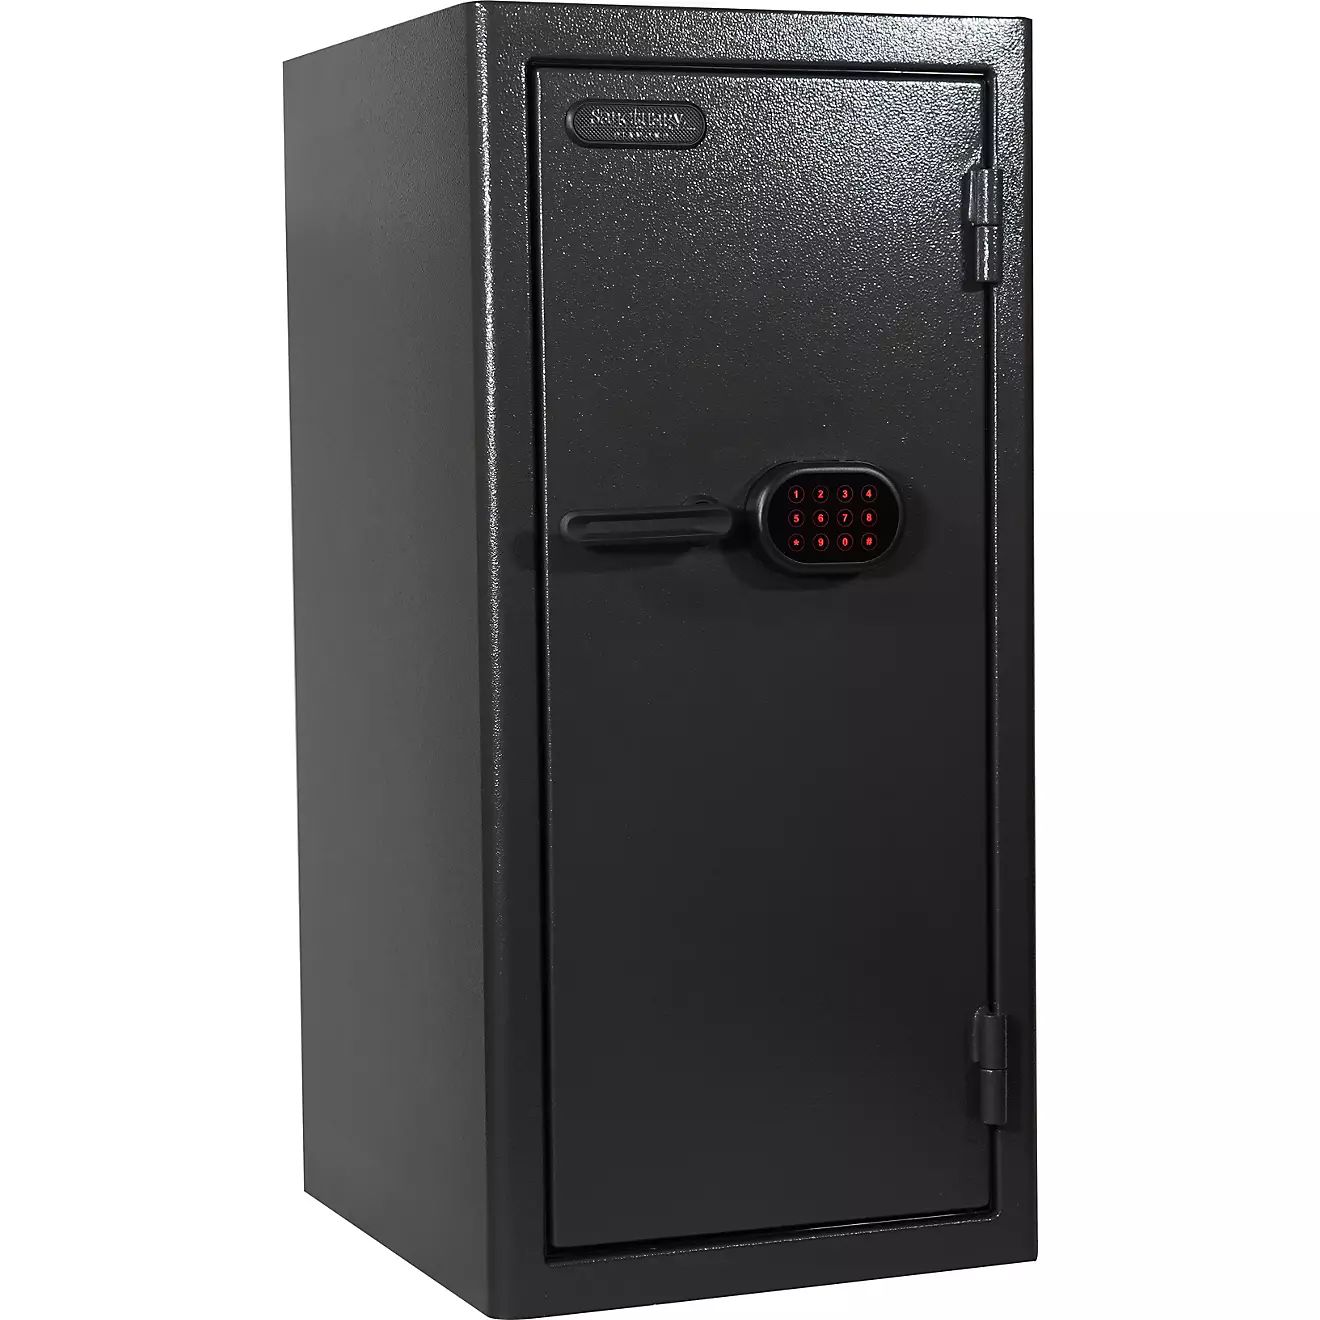 Sports Afield Sanctuary Diamond 36 in Home & Office Safe | Academy Sports + Outdoors